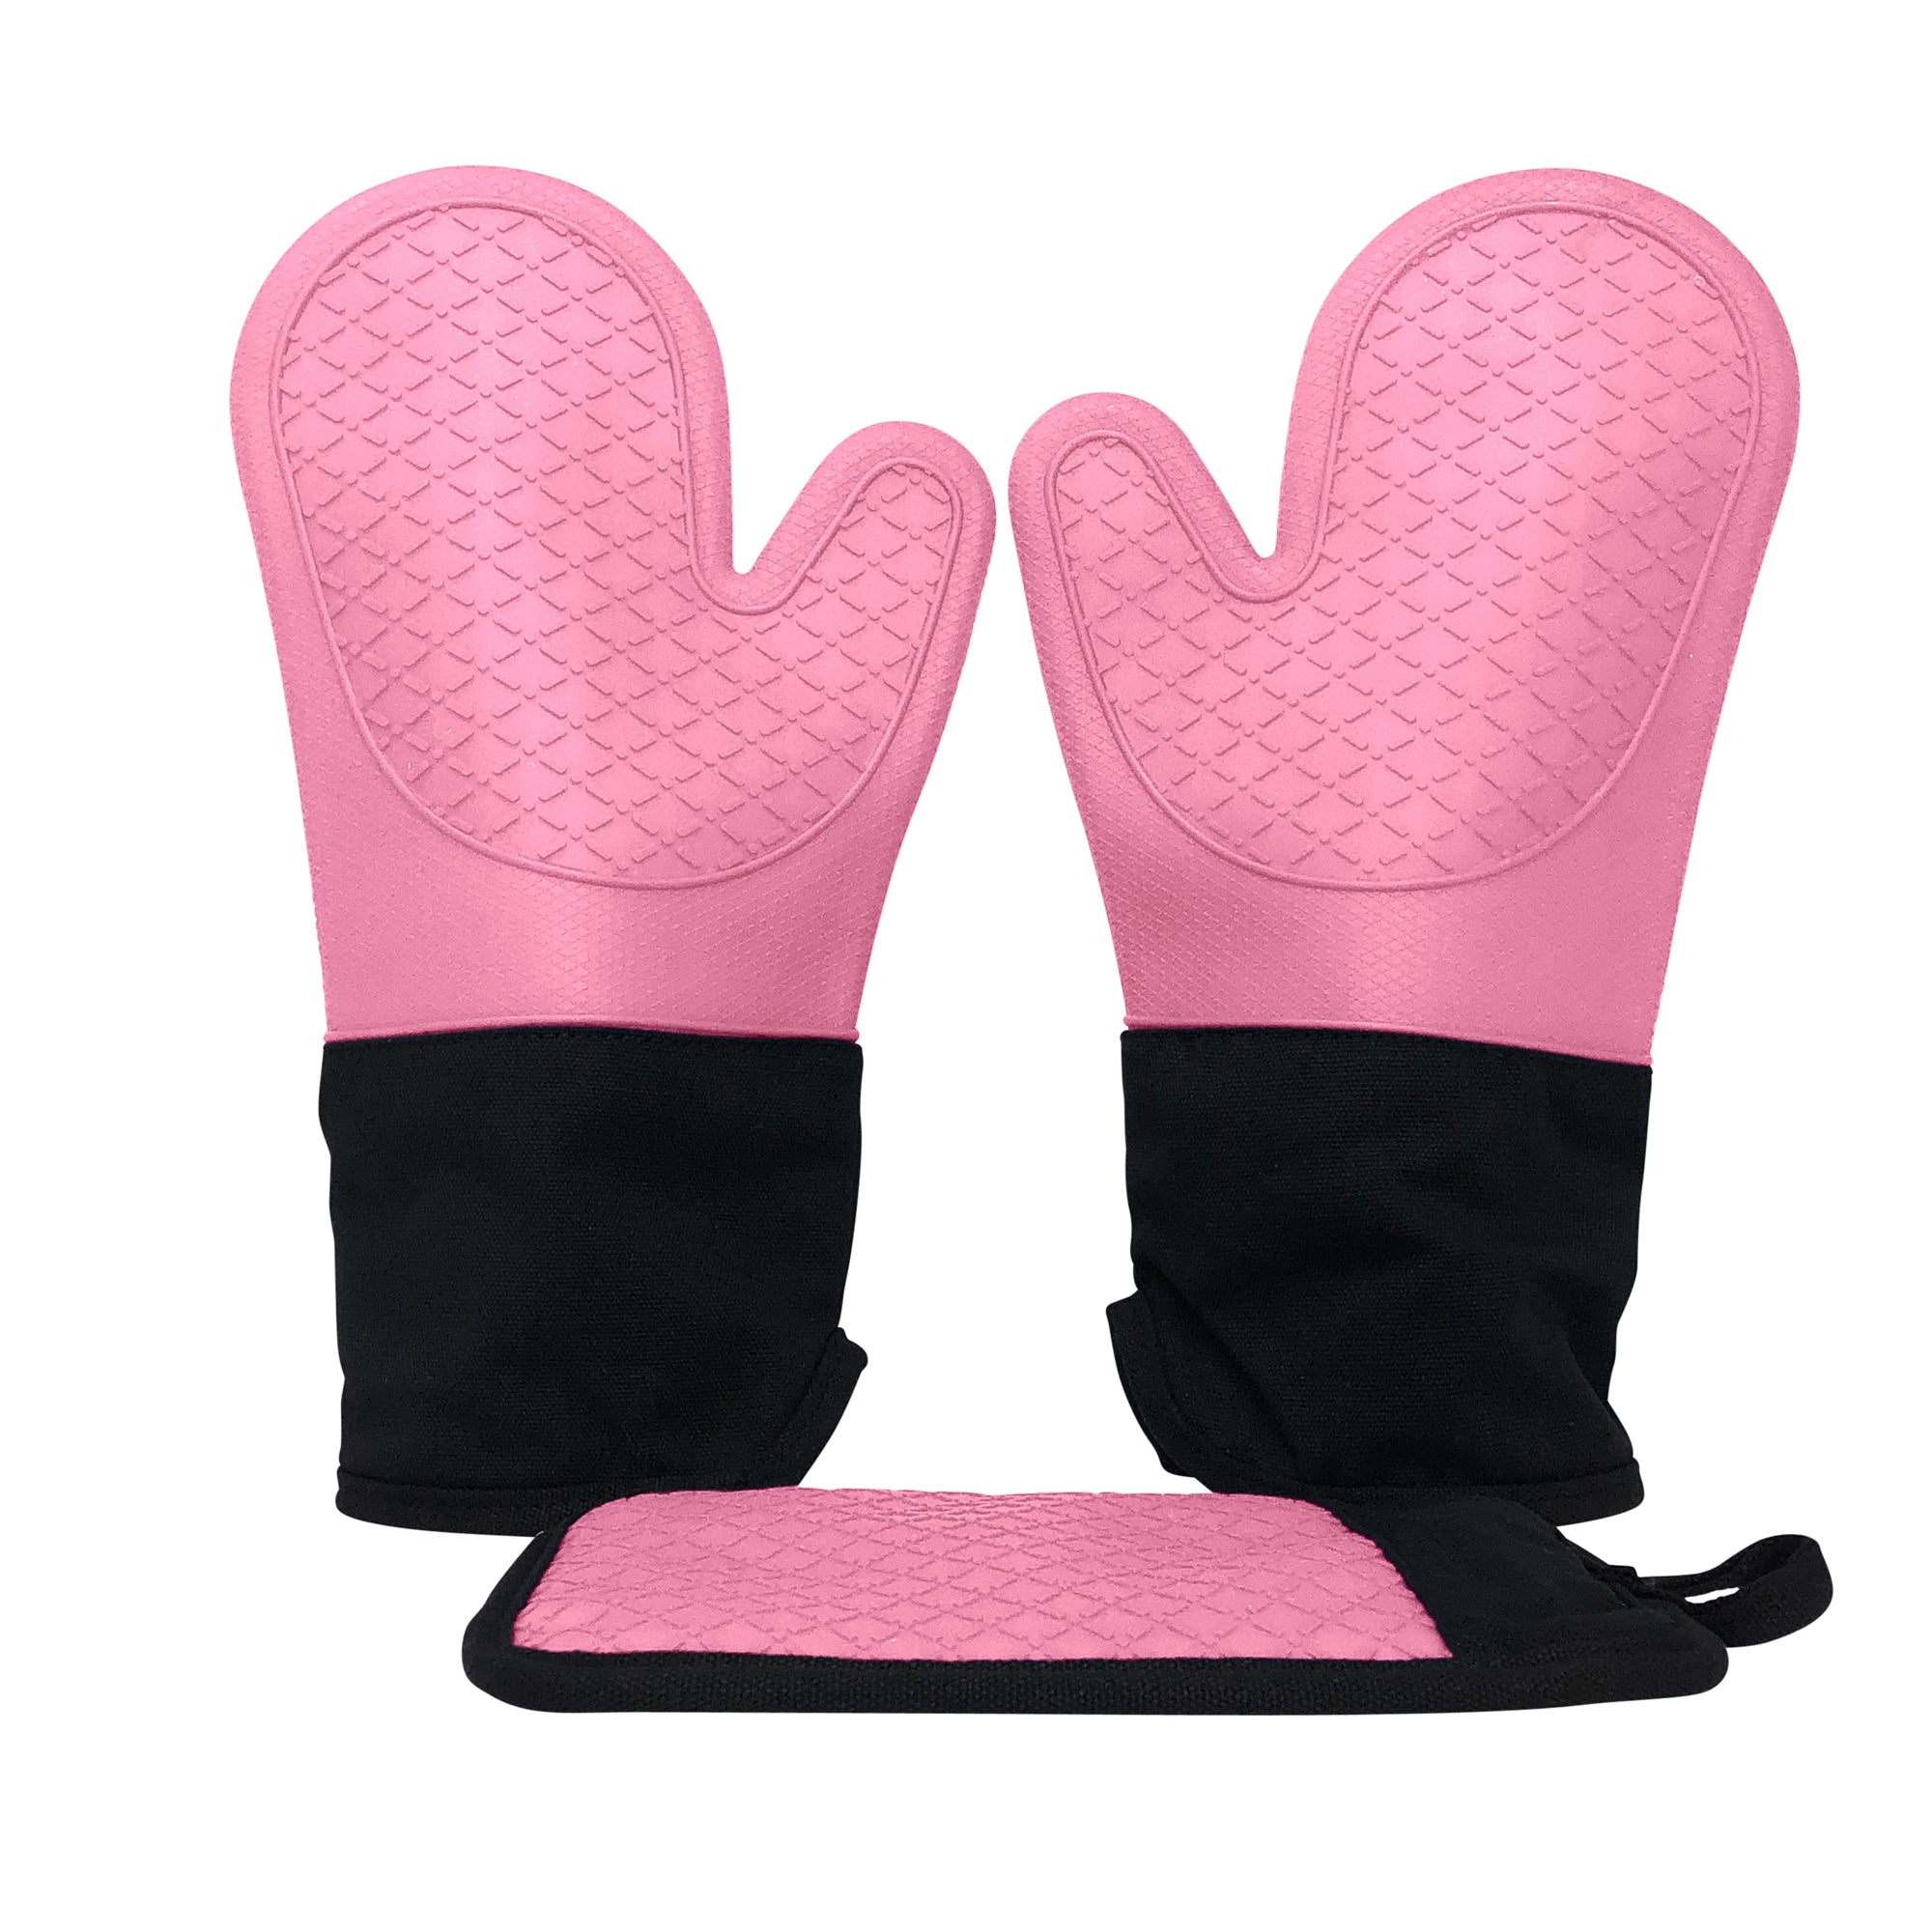 Ecoberi Silicone Oven Mitts and Pot Holder Set, Heat Resistant, Cook, Bake, BBQ, Pack of 3 Pink, Adult Unisex, Size: One Size